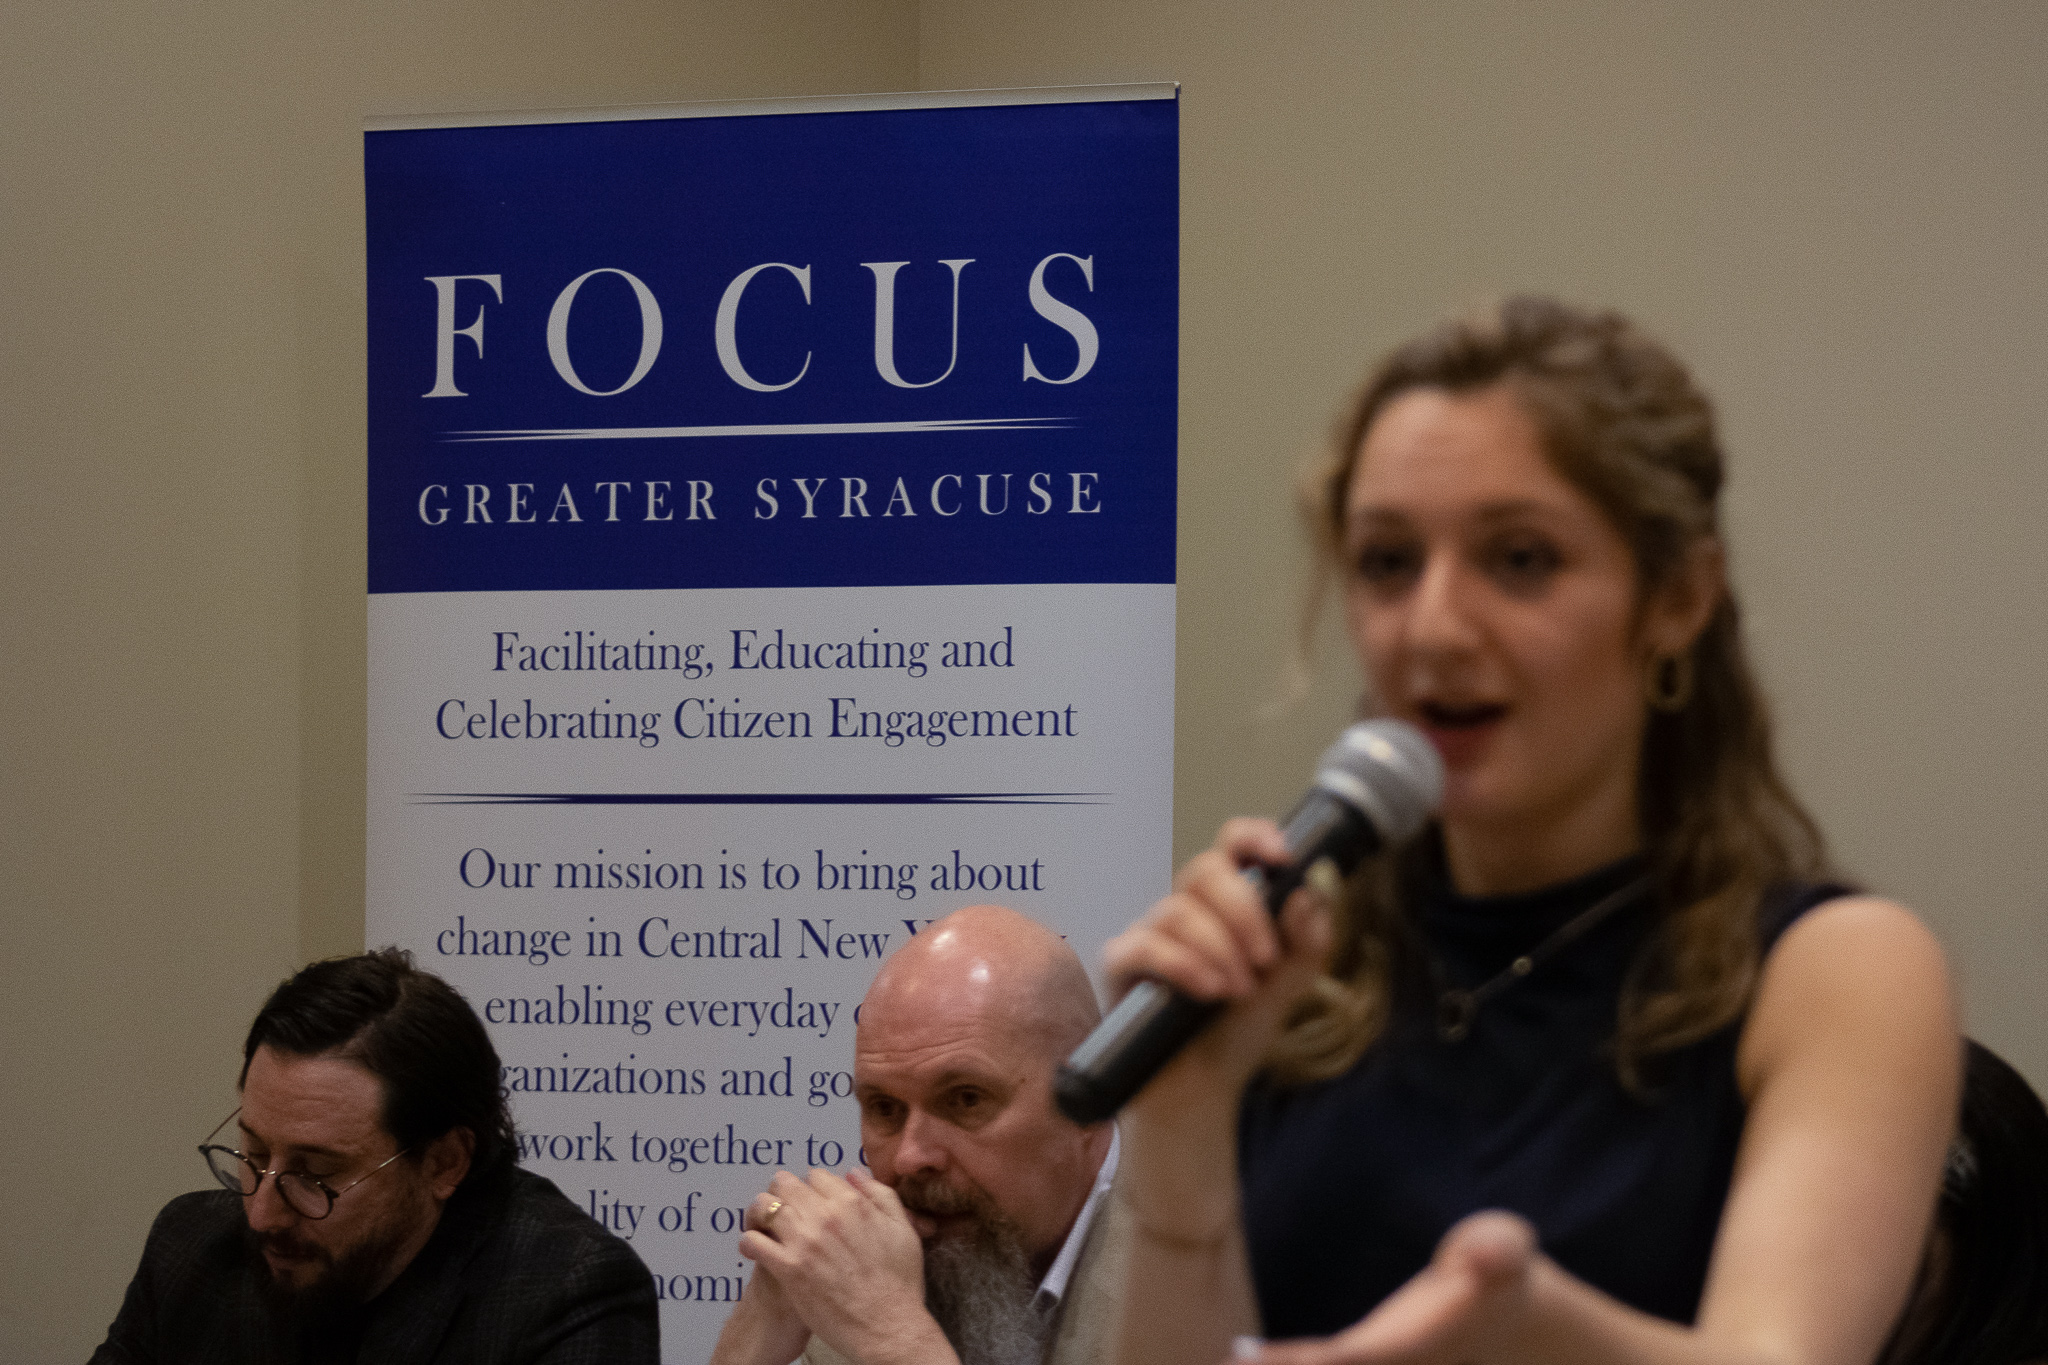 FOCUS event in February in Syracuse, New York